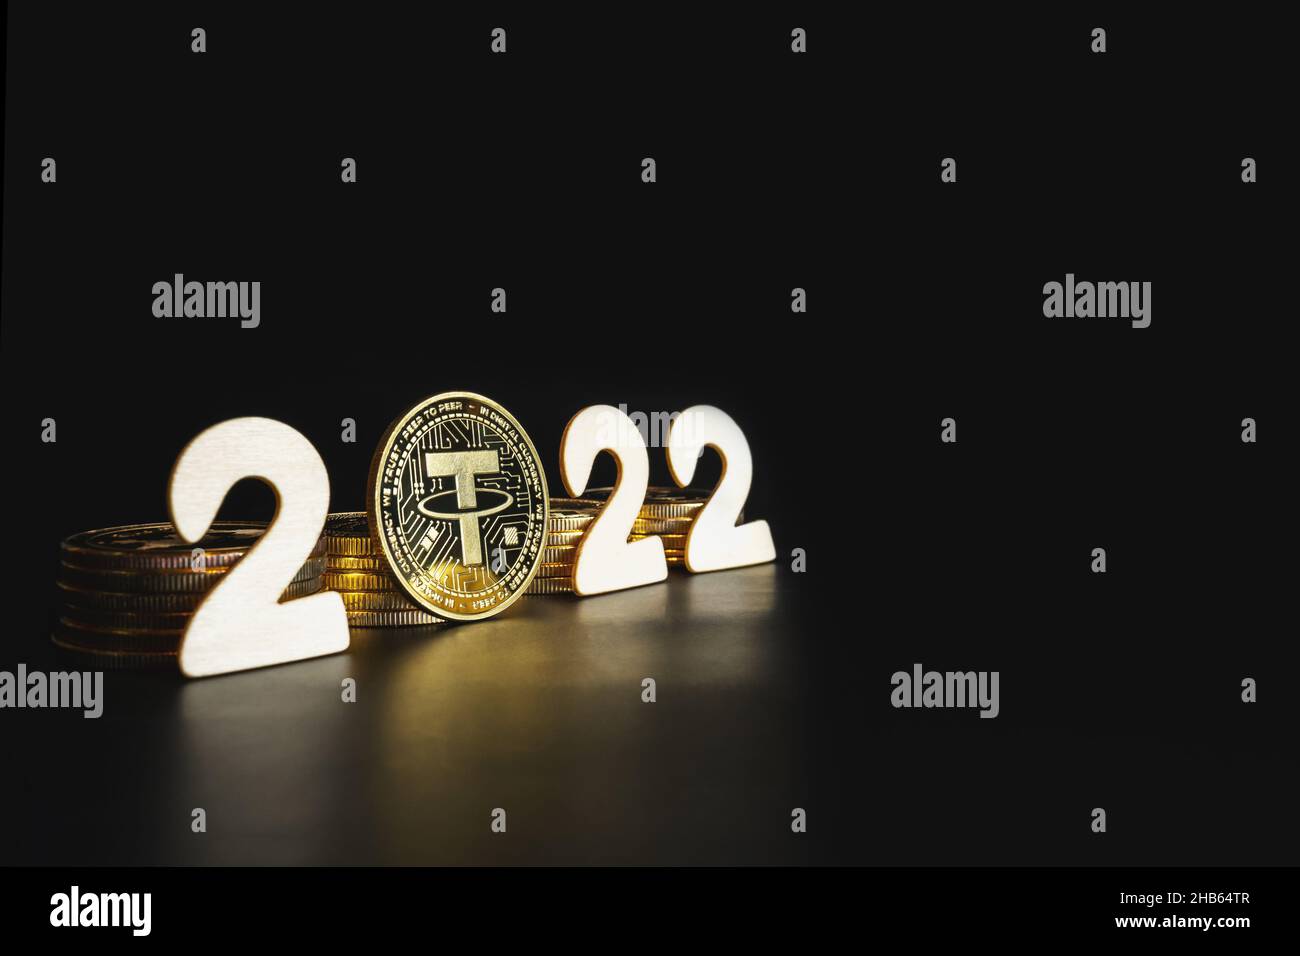 Tether in 2022. Single Tether gold coin next to the year numbers on black background with copy space for text. Value, market cap prediction concept. Stock Photo